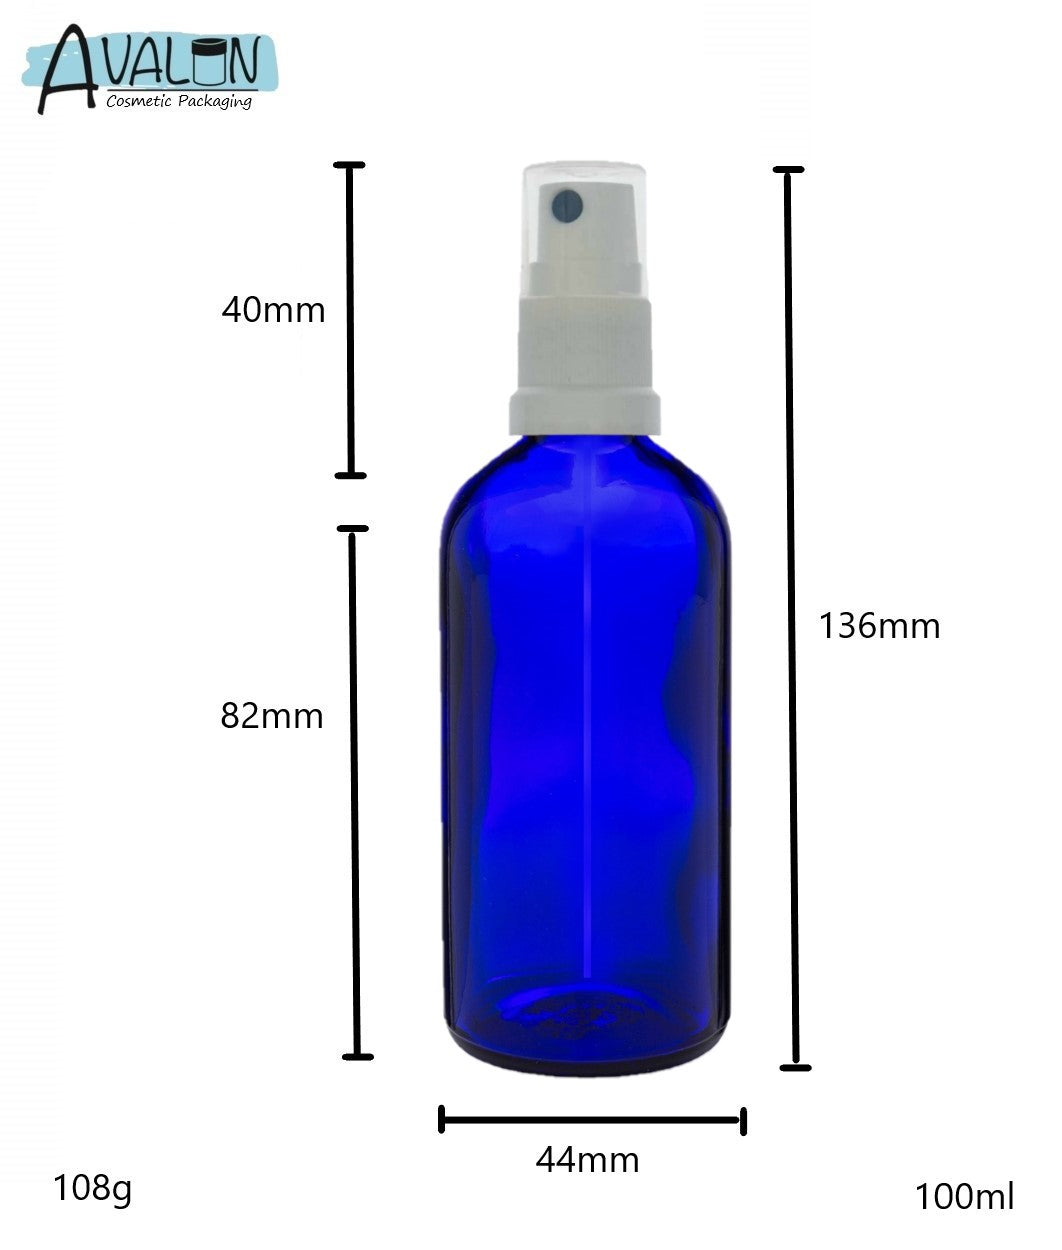 100ml Blue Glass Bottles with White Atomiser Spray and Clear Overcap